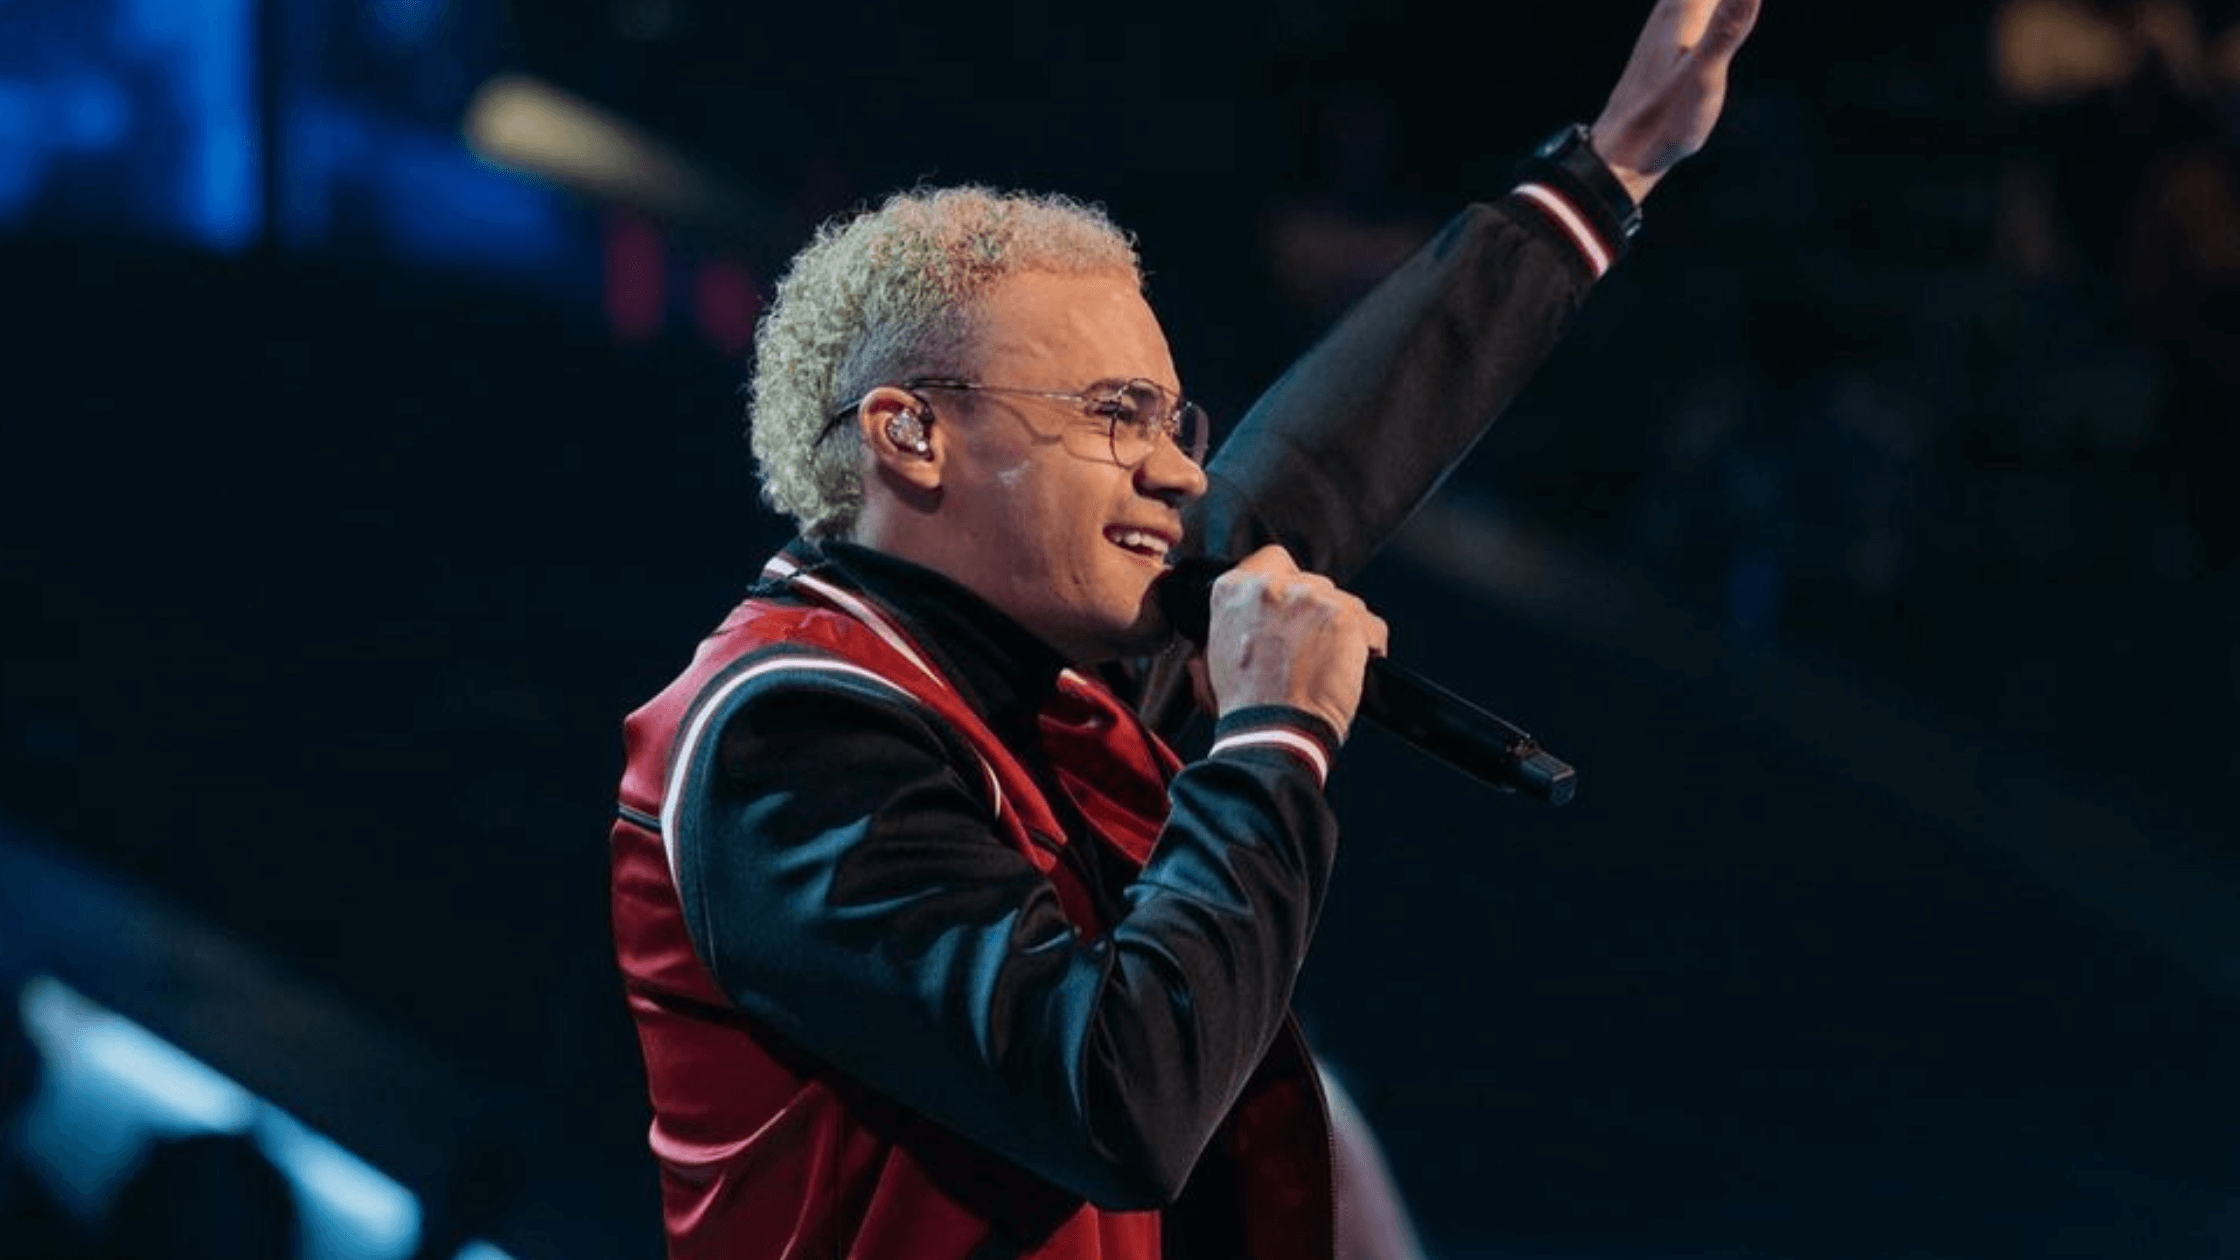 Things You May Not Know about Tauren Wells - GOSPELHB